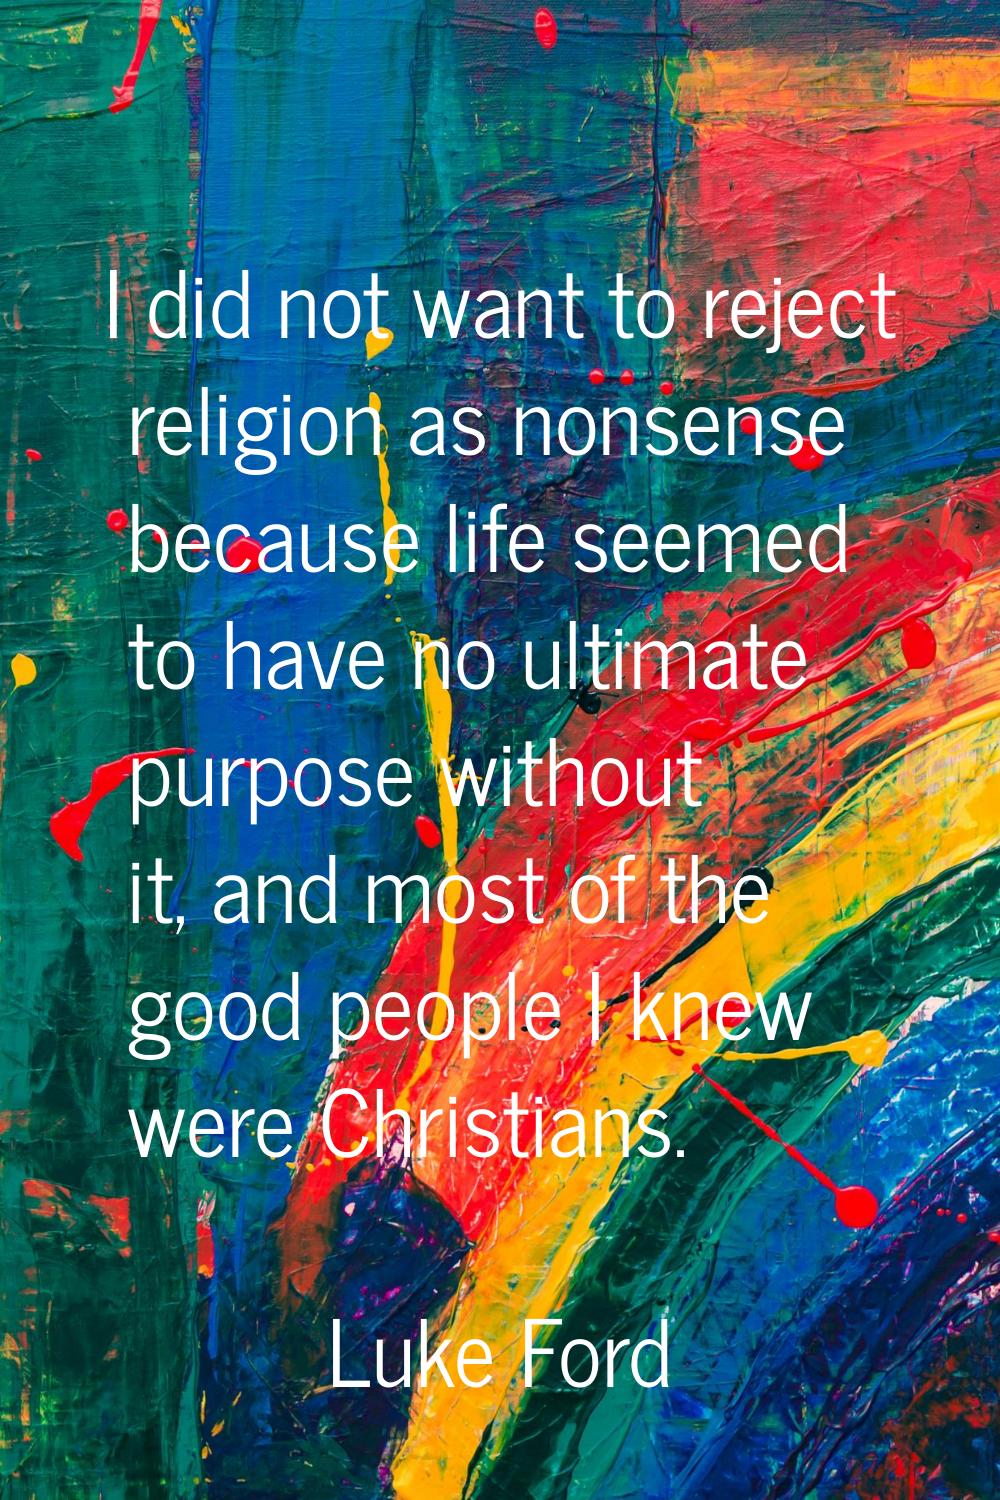 I did not want to reject religion as nonsense because life seemed to have no ultimate purpose witho